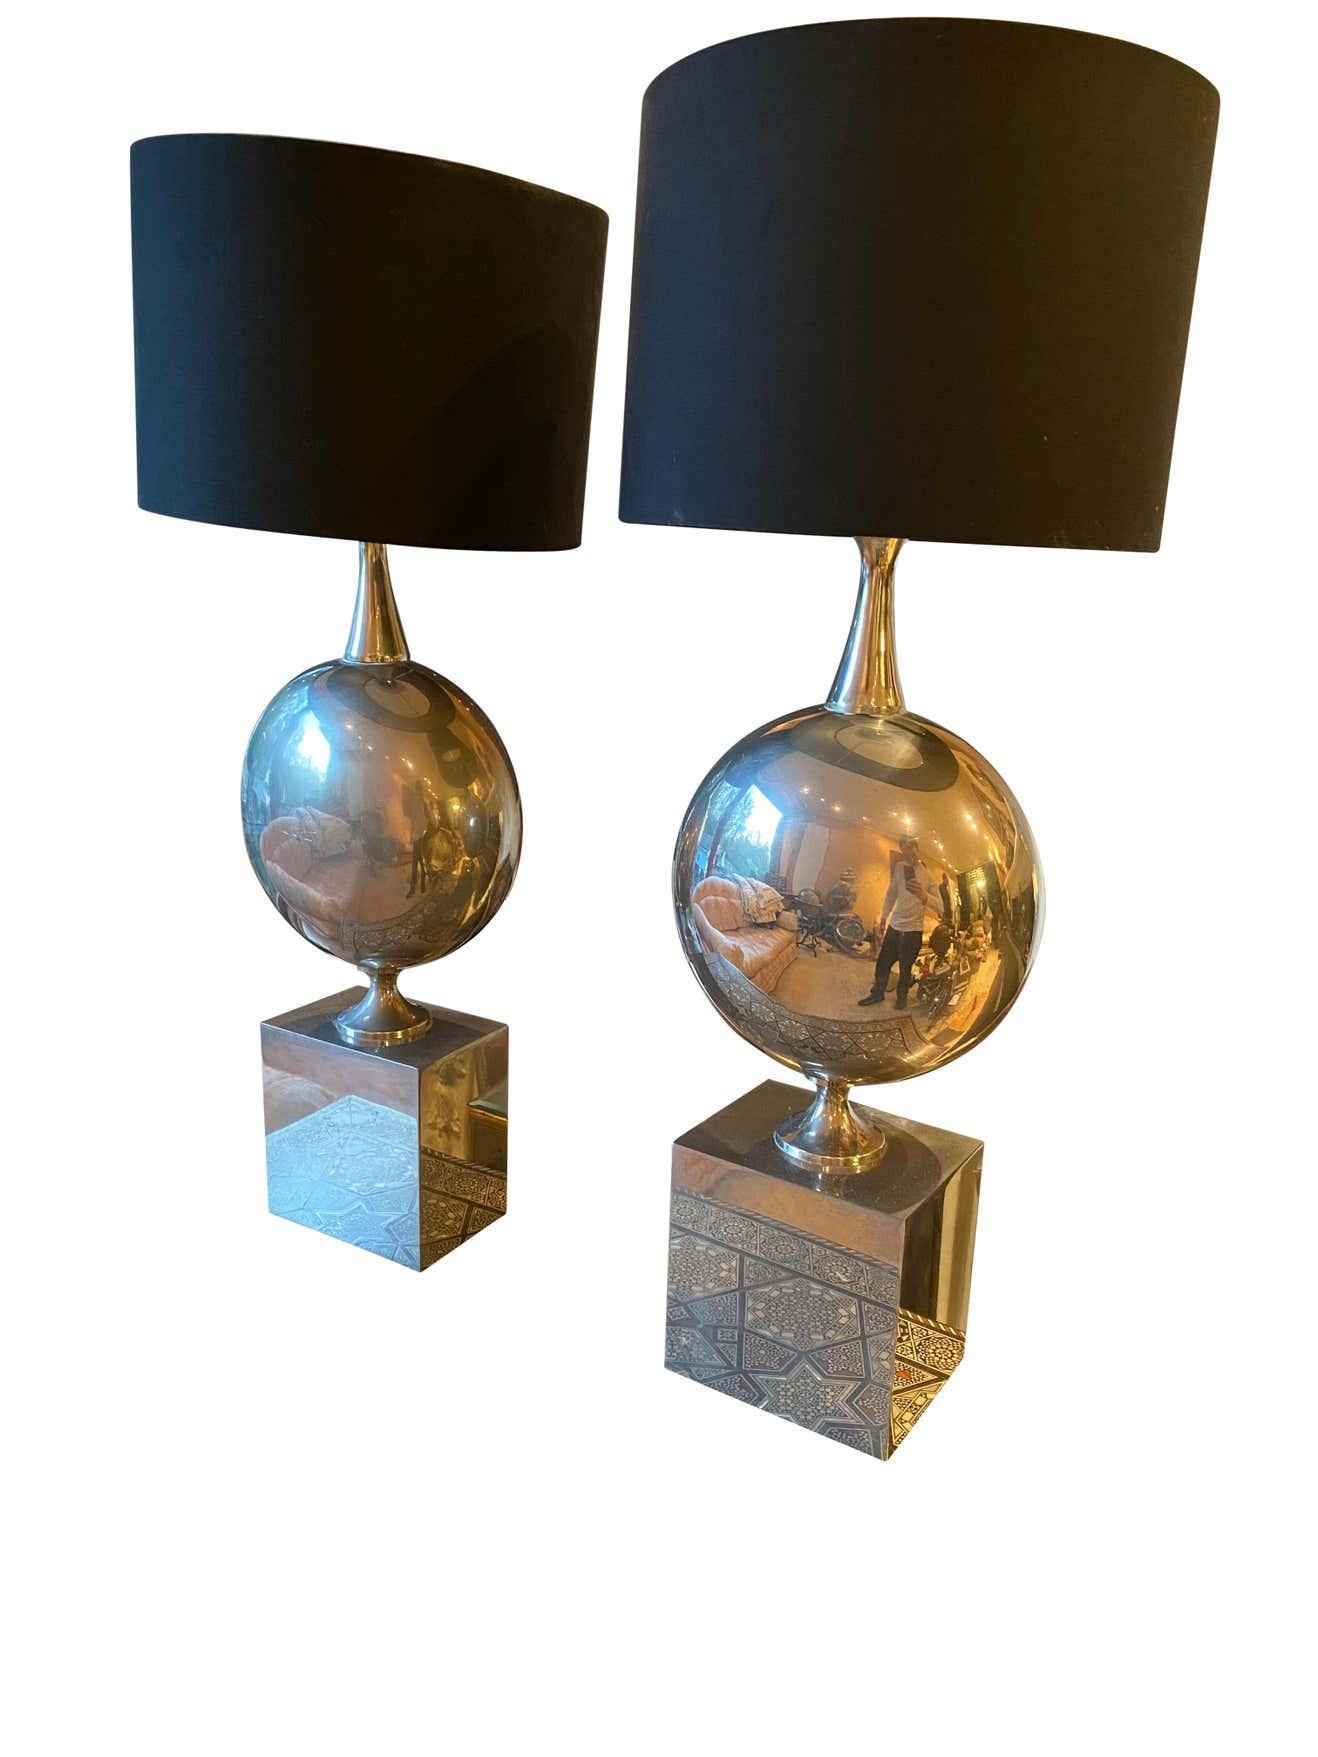 Maison Barbier Pair of Chromed Steel Table Lamps, 1970s In Good Condition For Sale In Southall, GB